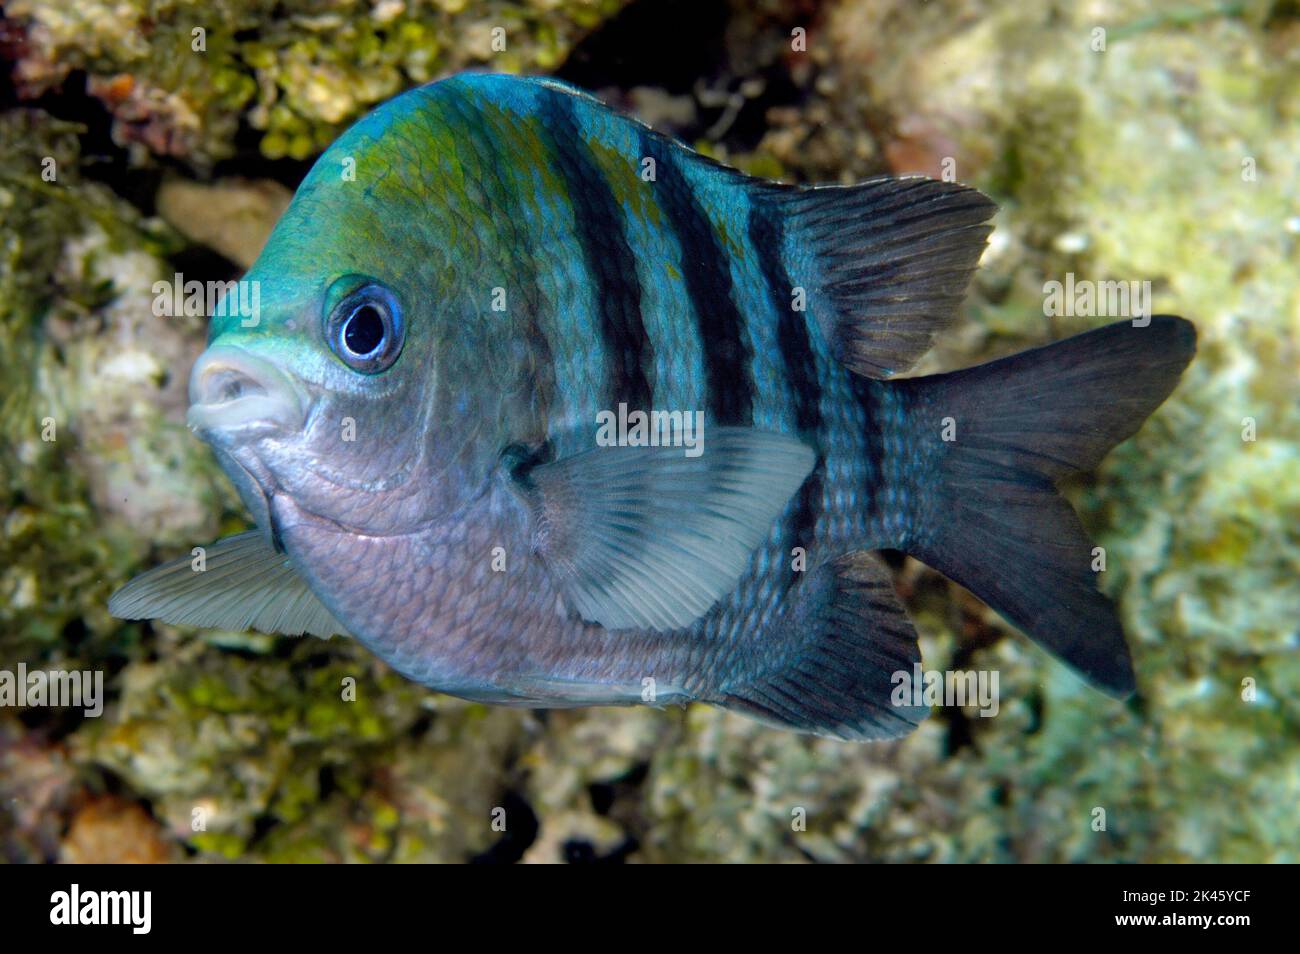 A Caribbean damselfish called a sergeant major cruises a reef looking for food in the waters of Roatan in Honduras. Stock Photo